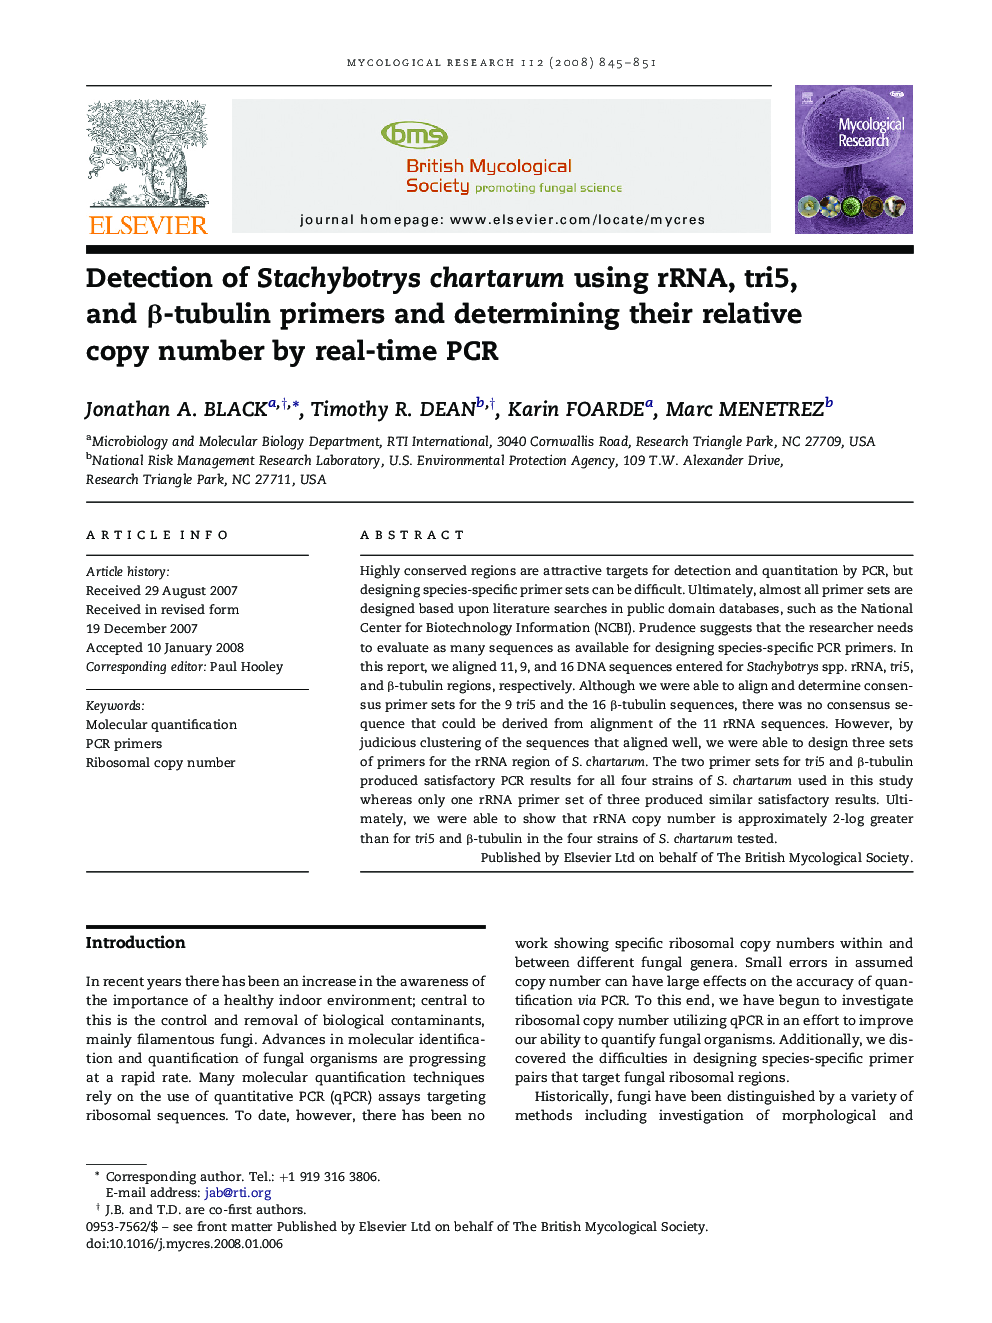 Detection of Stachybotrys chartarum using rRNA, tri5, and Î²-tubulin primers and determining their relative copy number by real-time PCR